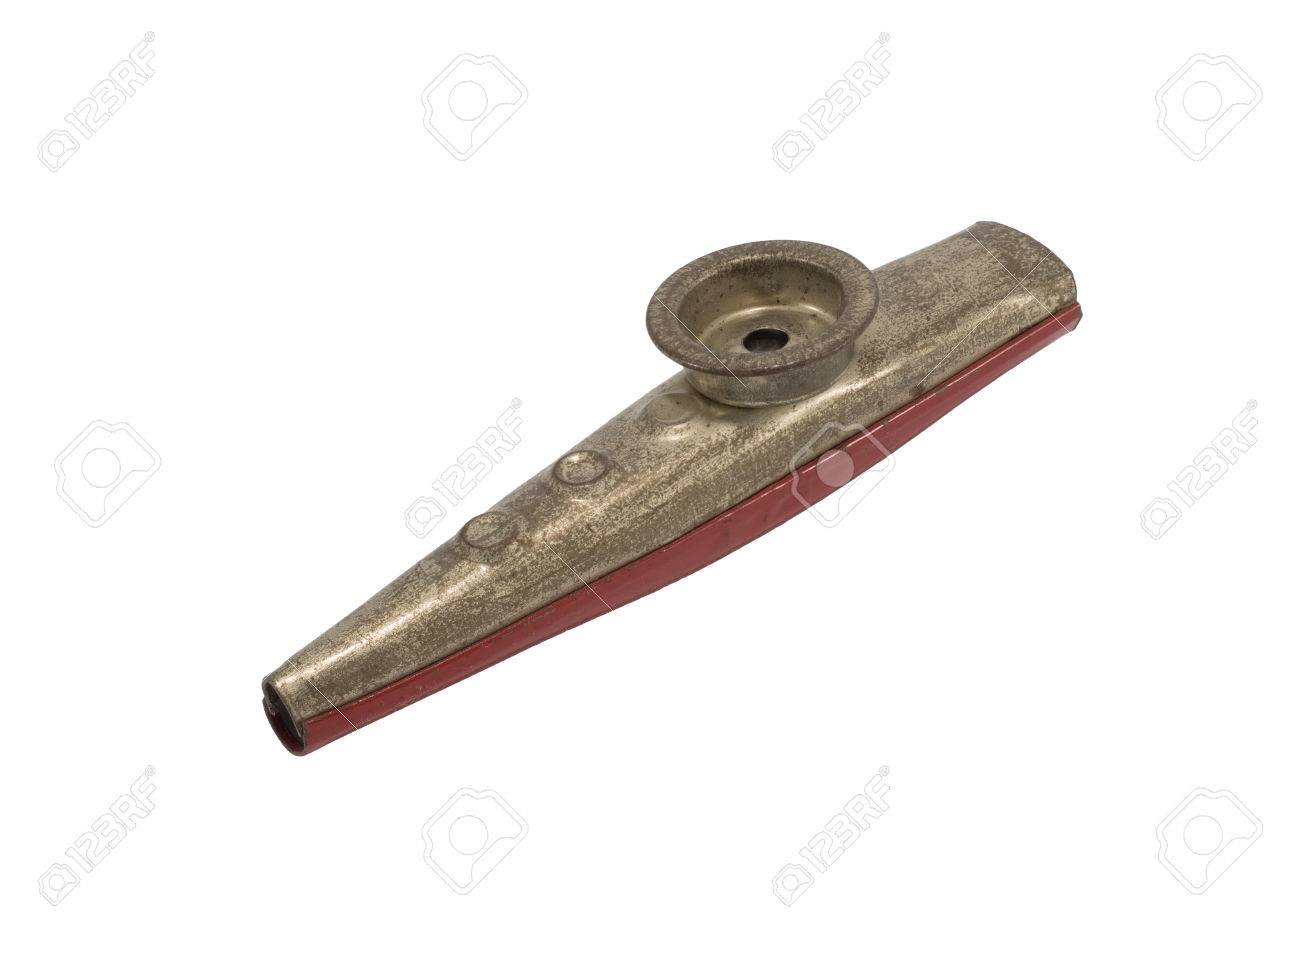 65311078-old-golden-and-red-metal-kazoo-musical-instrument-isolated-on-white-background.jpg